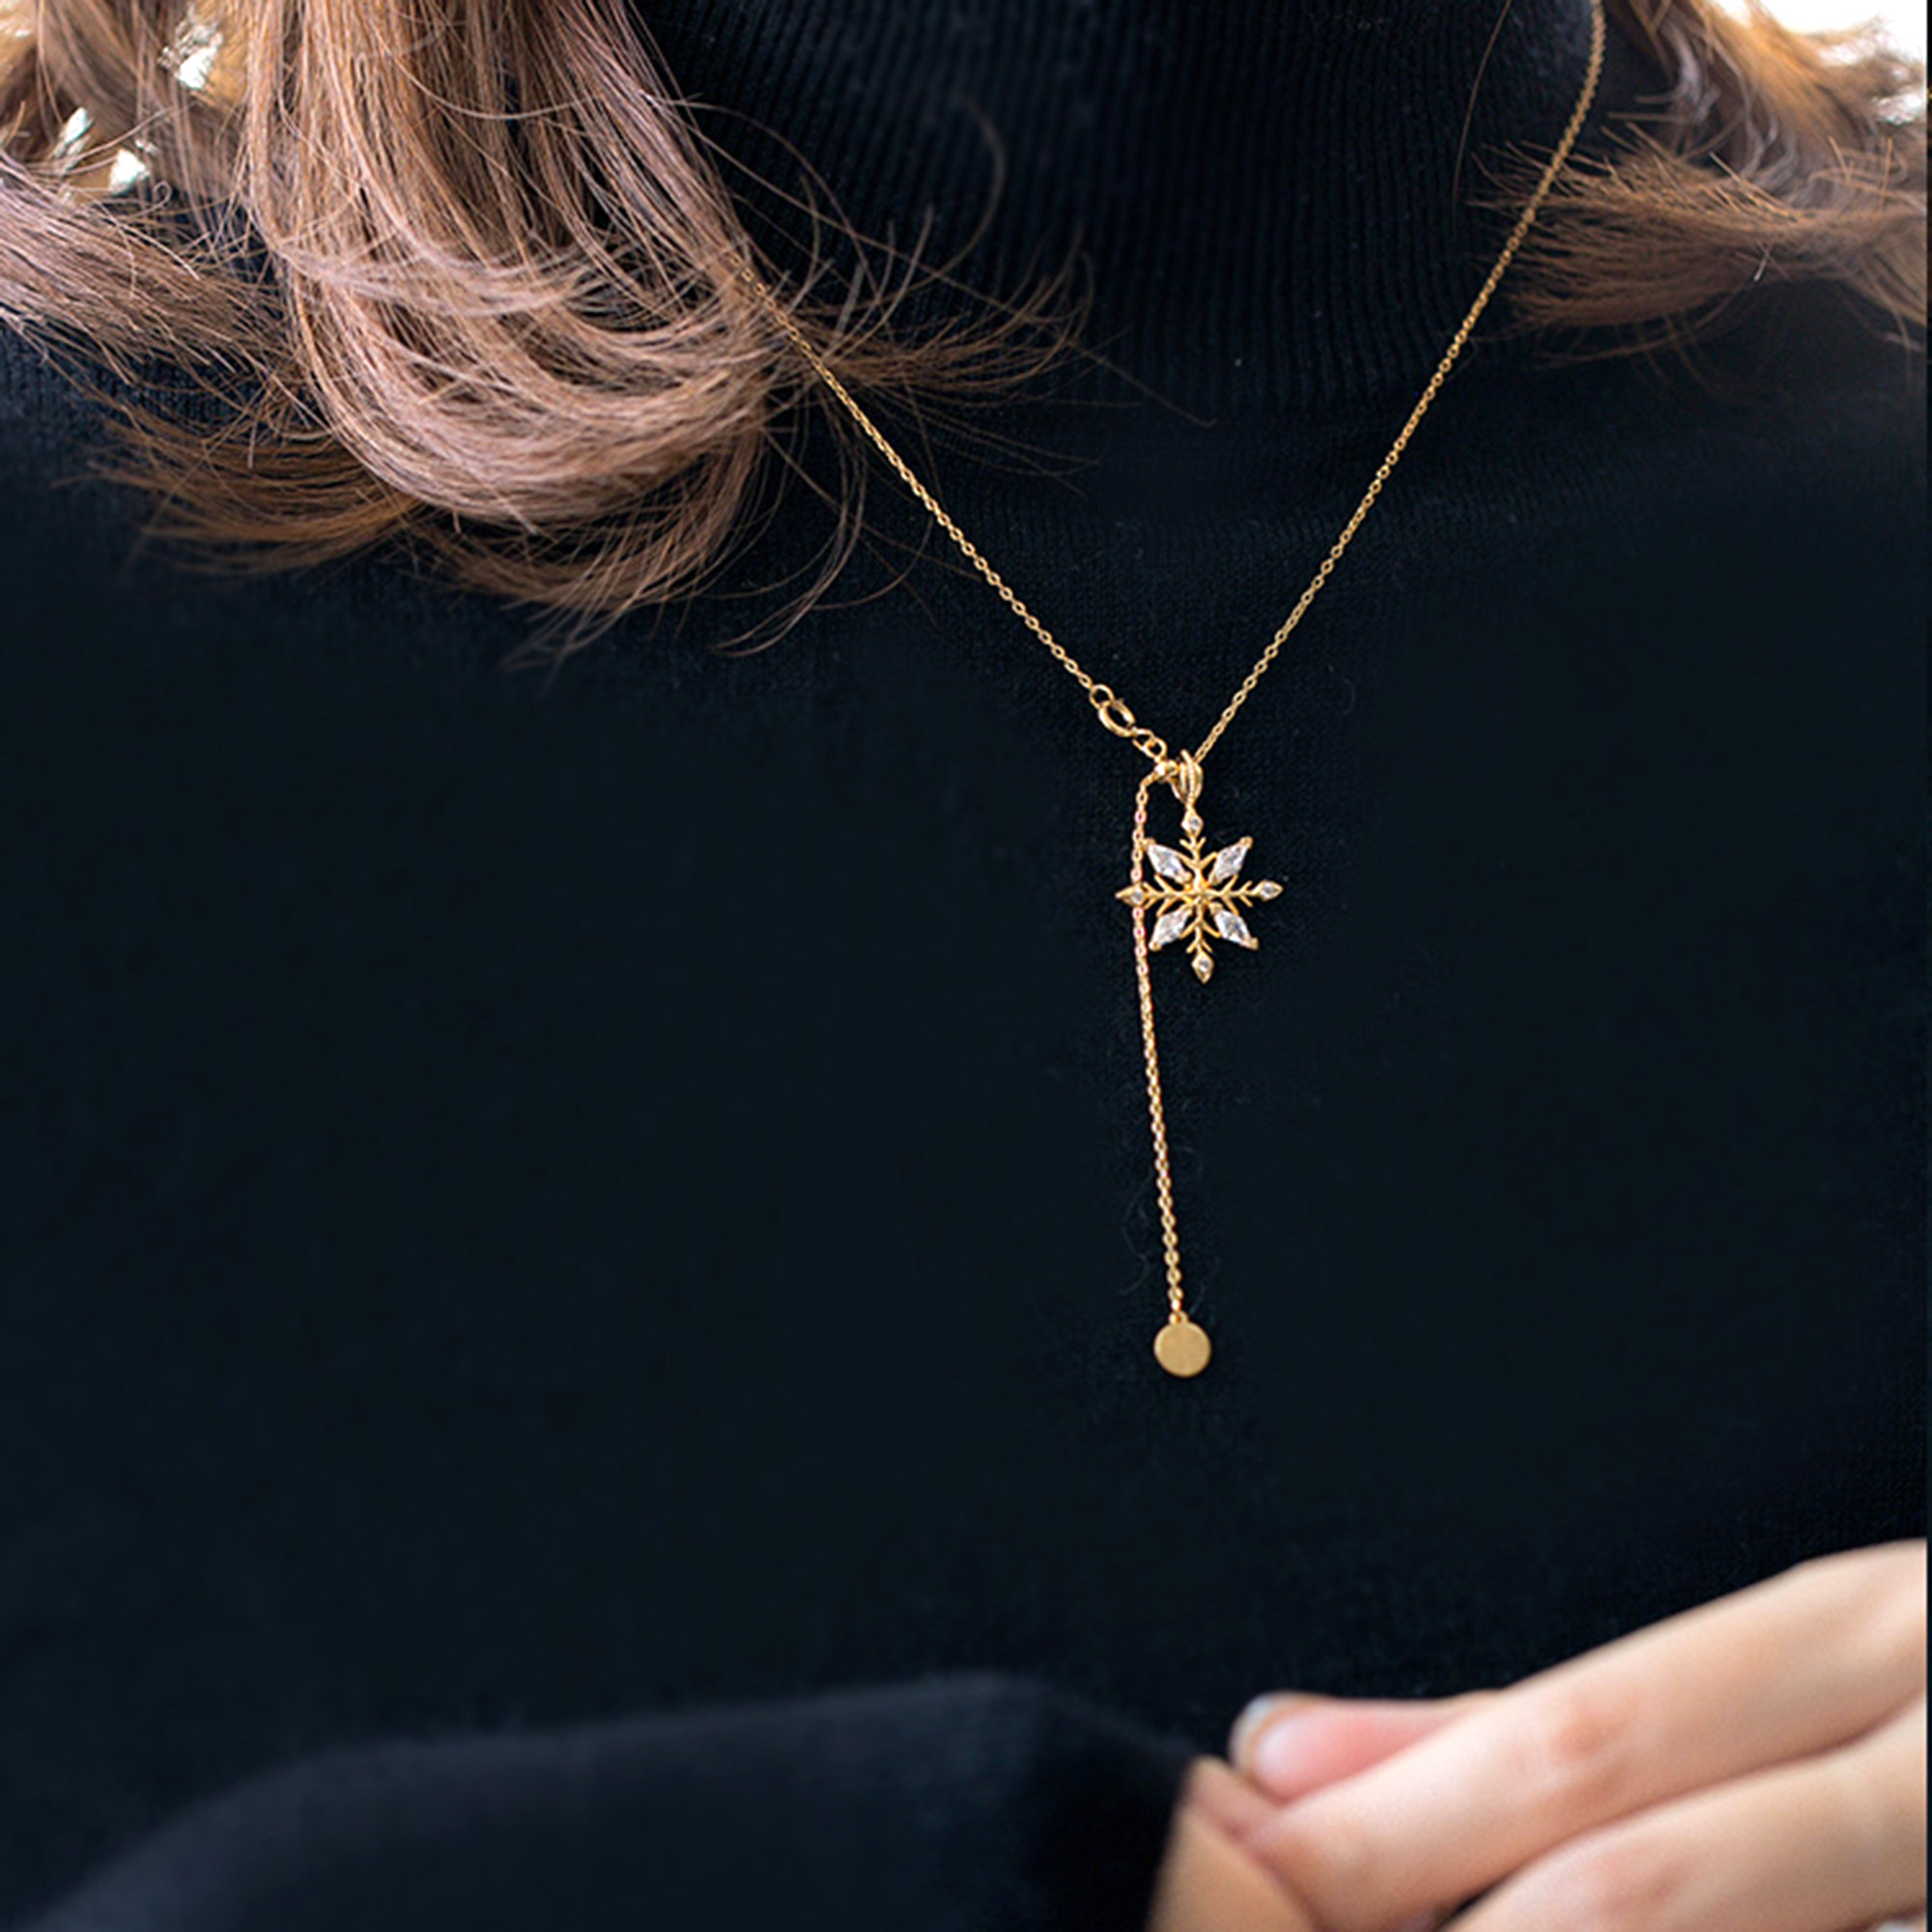 🎄CHRISTMAS PRE SALE 80% OFF❄Gold Snowflake Necklace